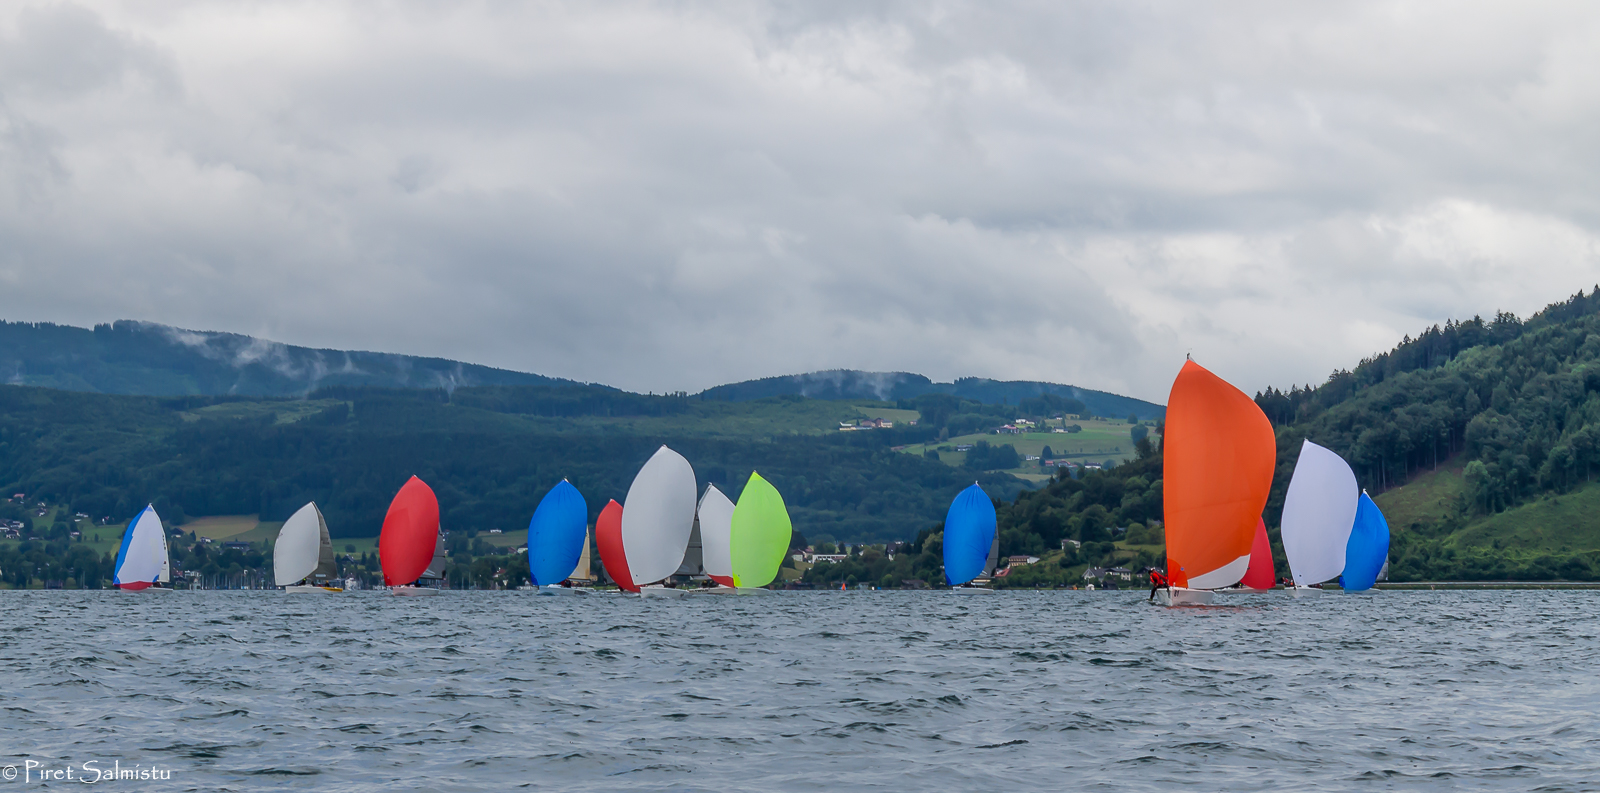  Melges 24  European Sailing Series  Attersee AUT  Final results